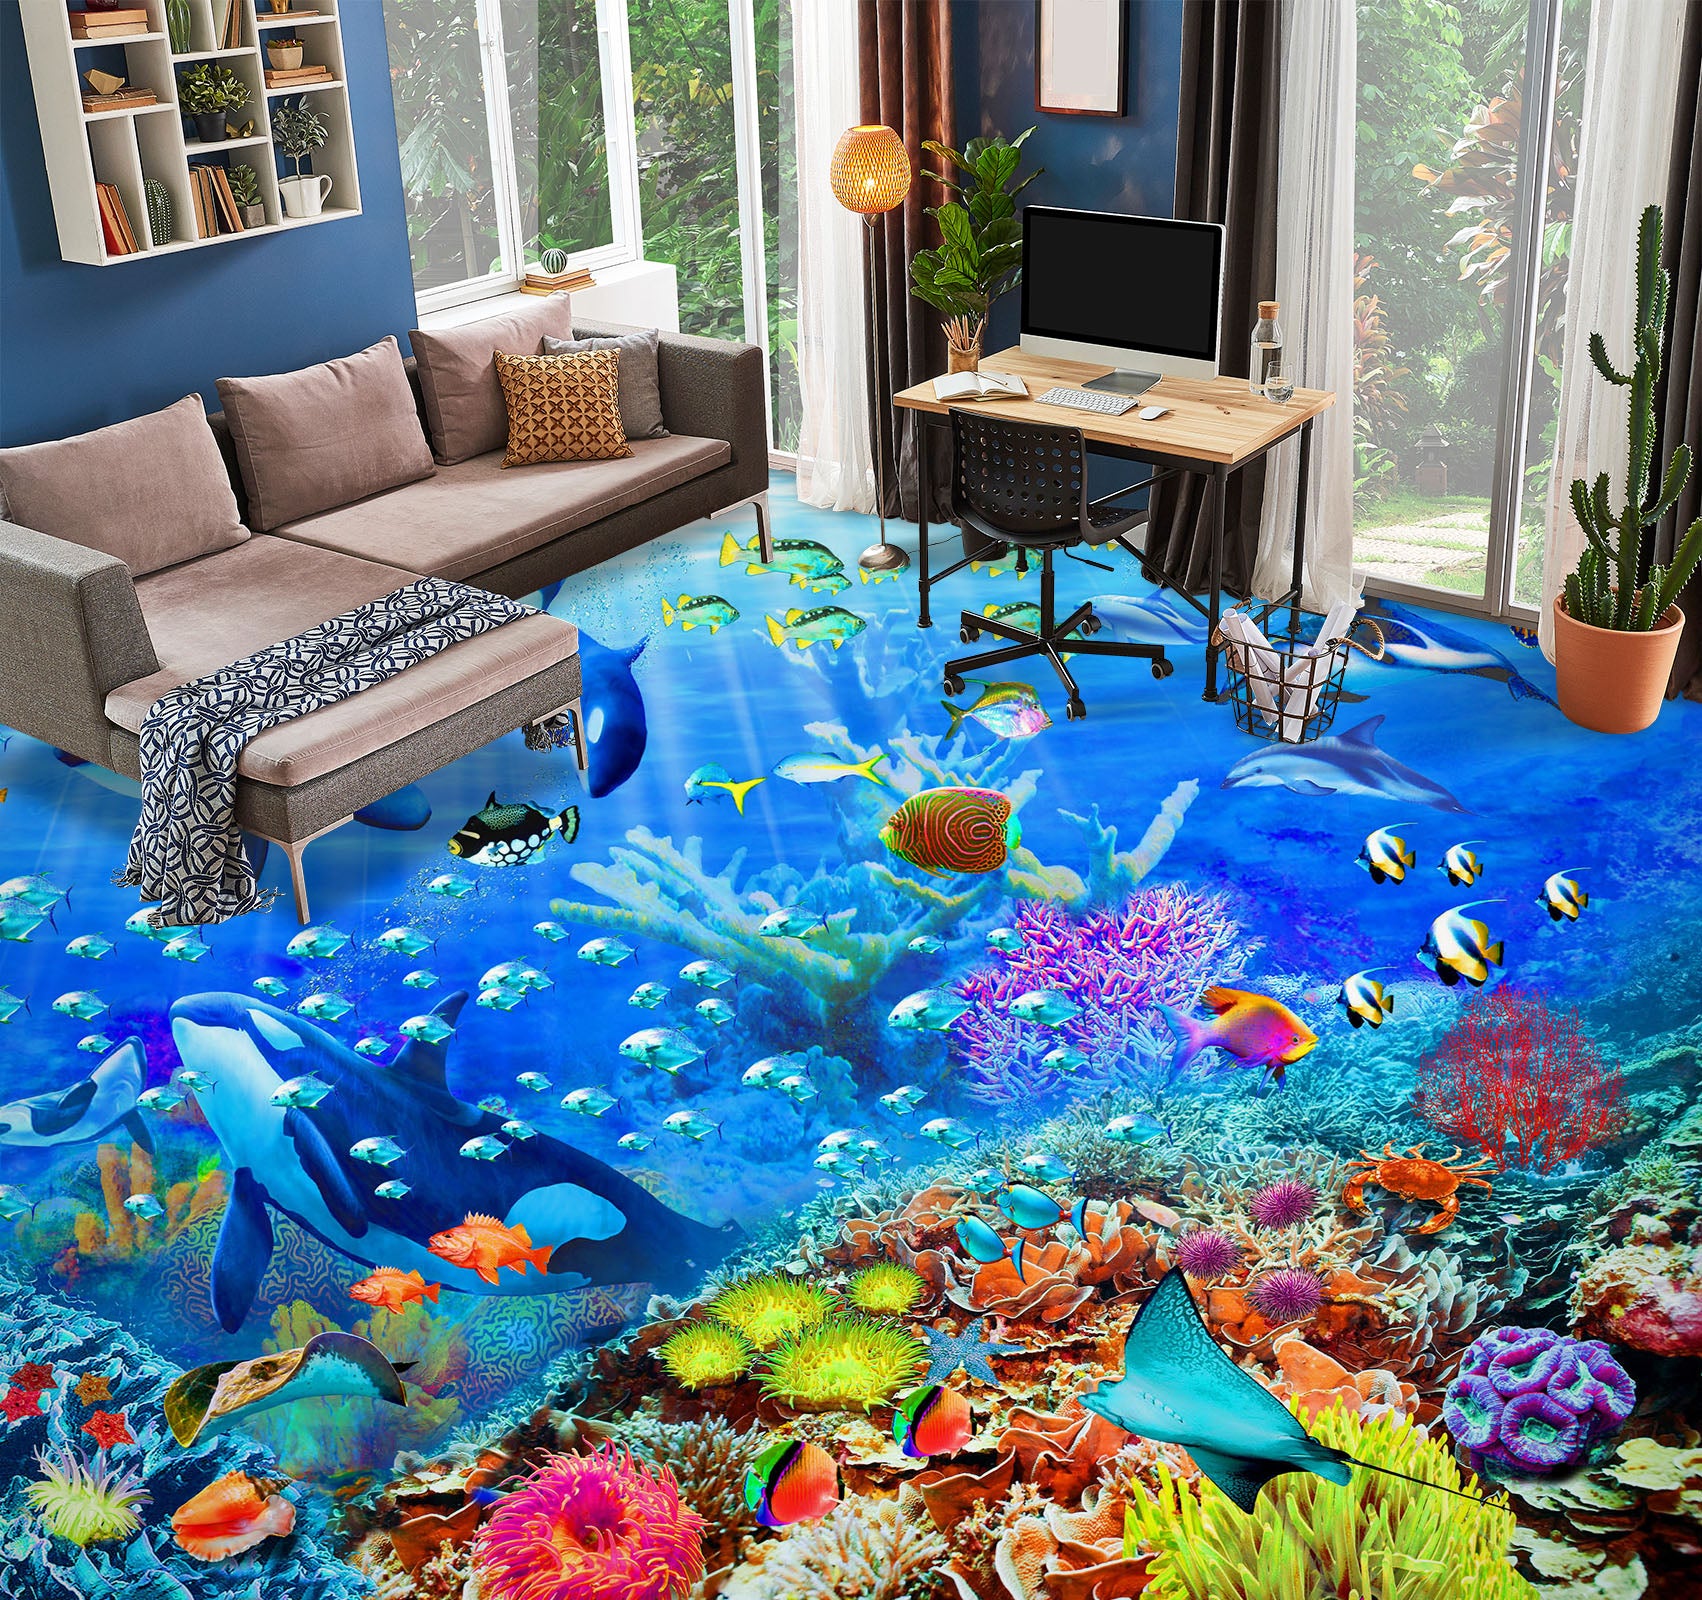 3D Ocean Whale Colorful Coral 96213 Adrian Chesterman Floor Mural  Wallpaper Murals Self-Adhesive Removable Print Epoxy